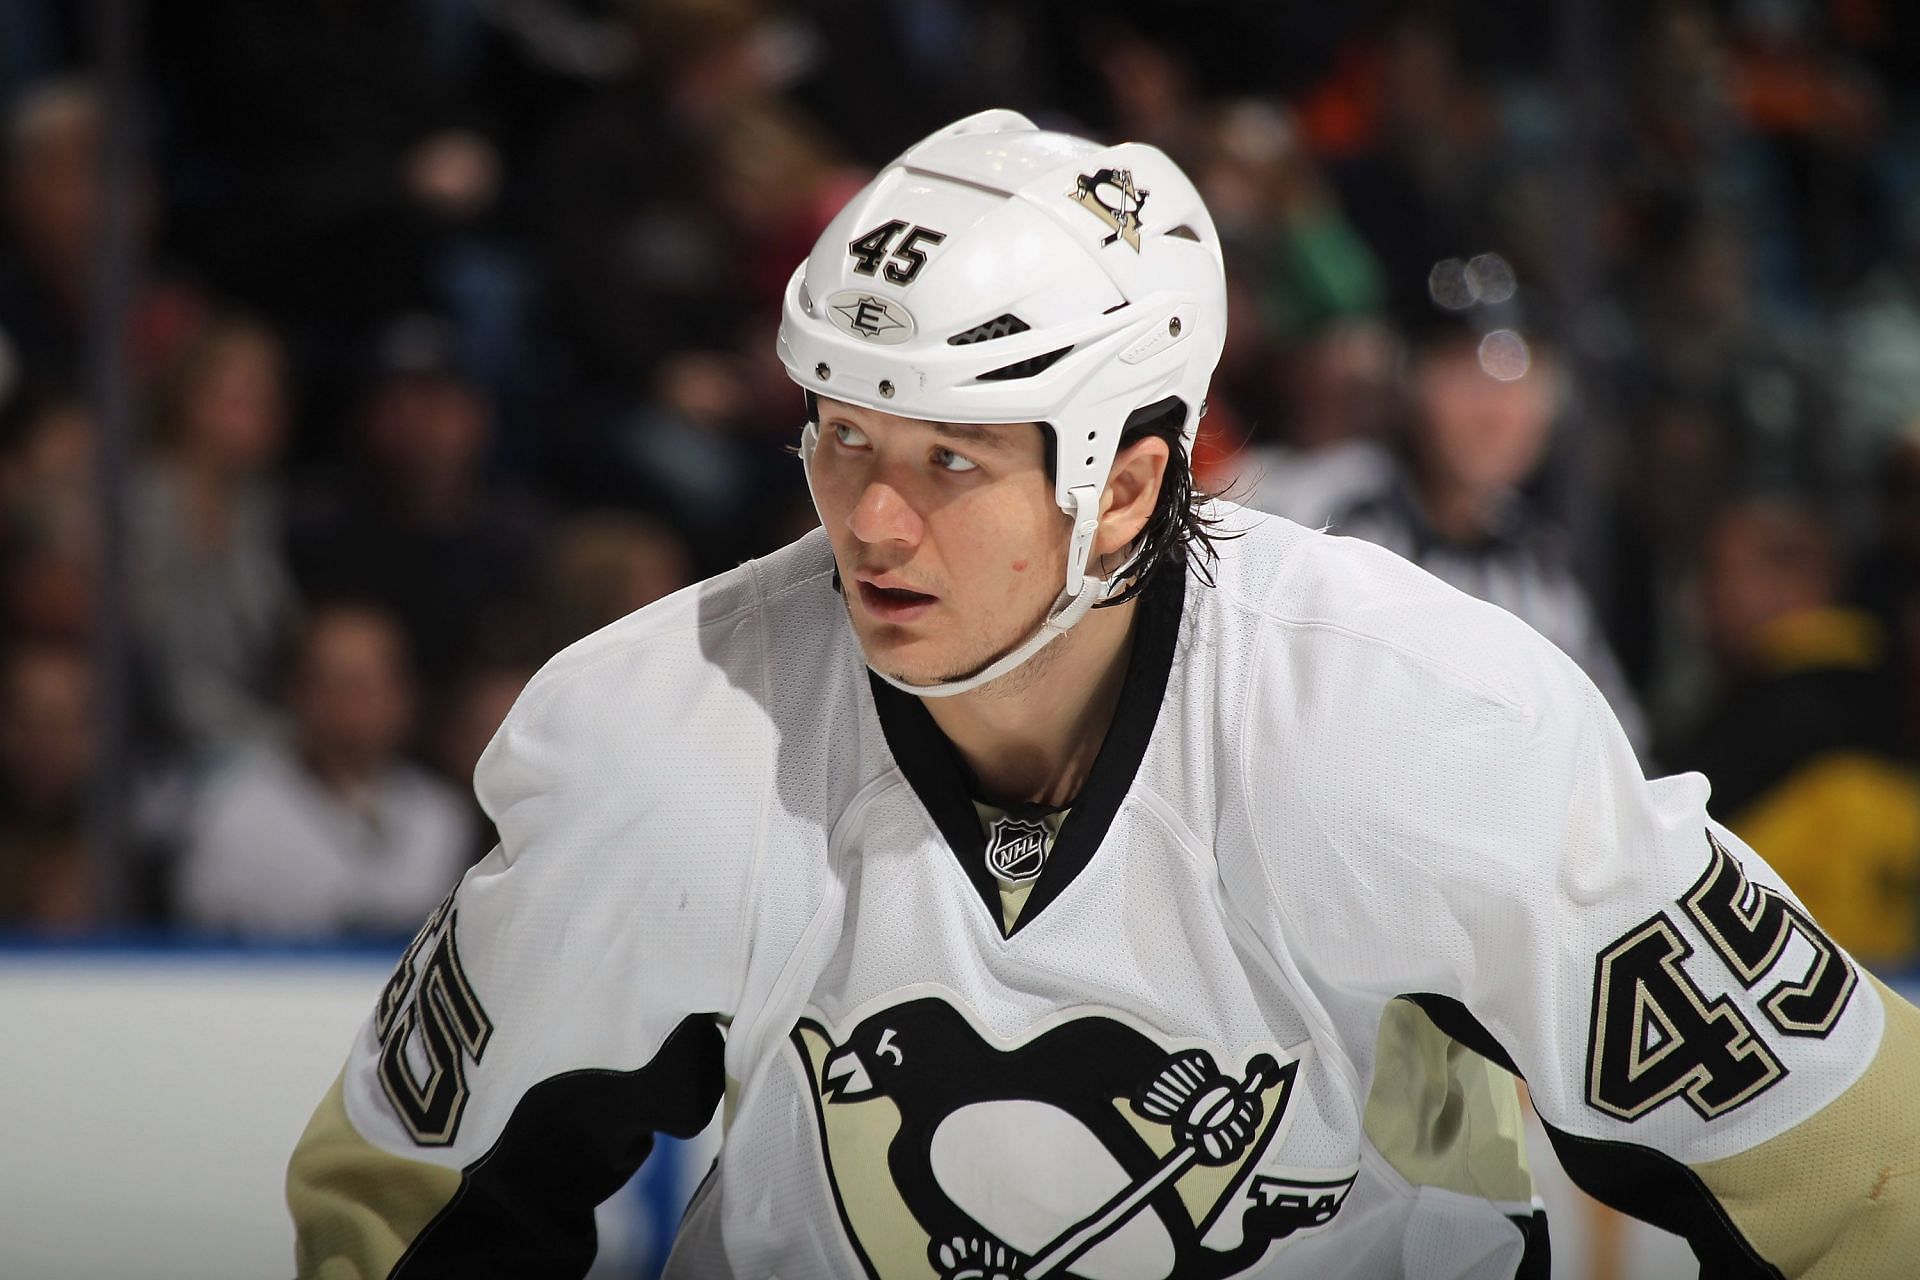 New season. New players. New numbers. - Pittsburgh Penguins